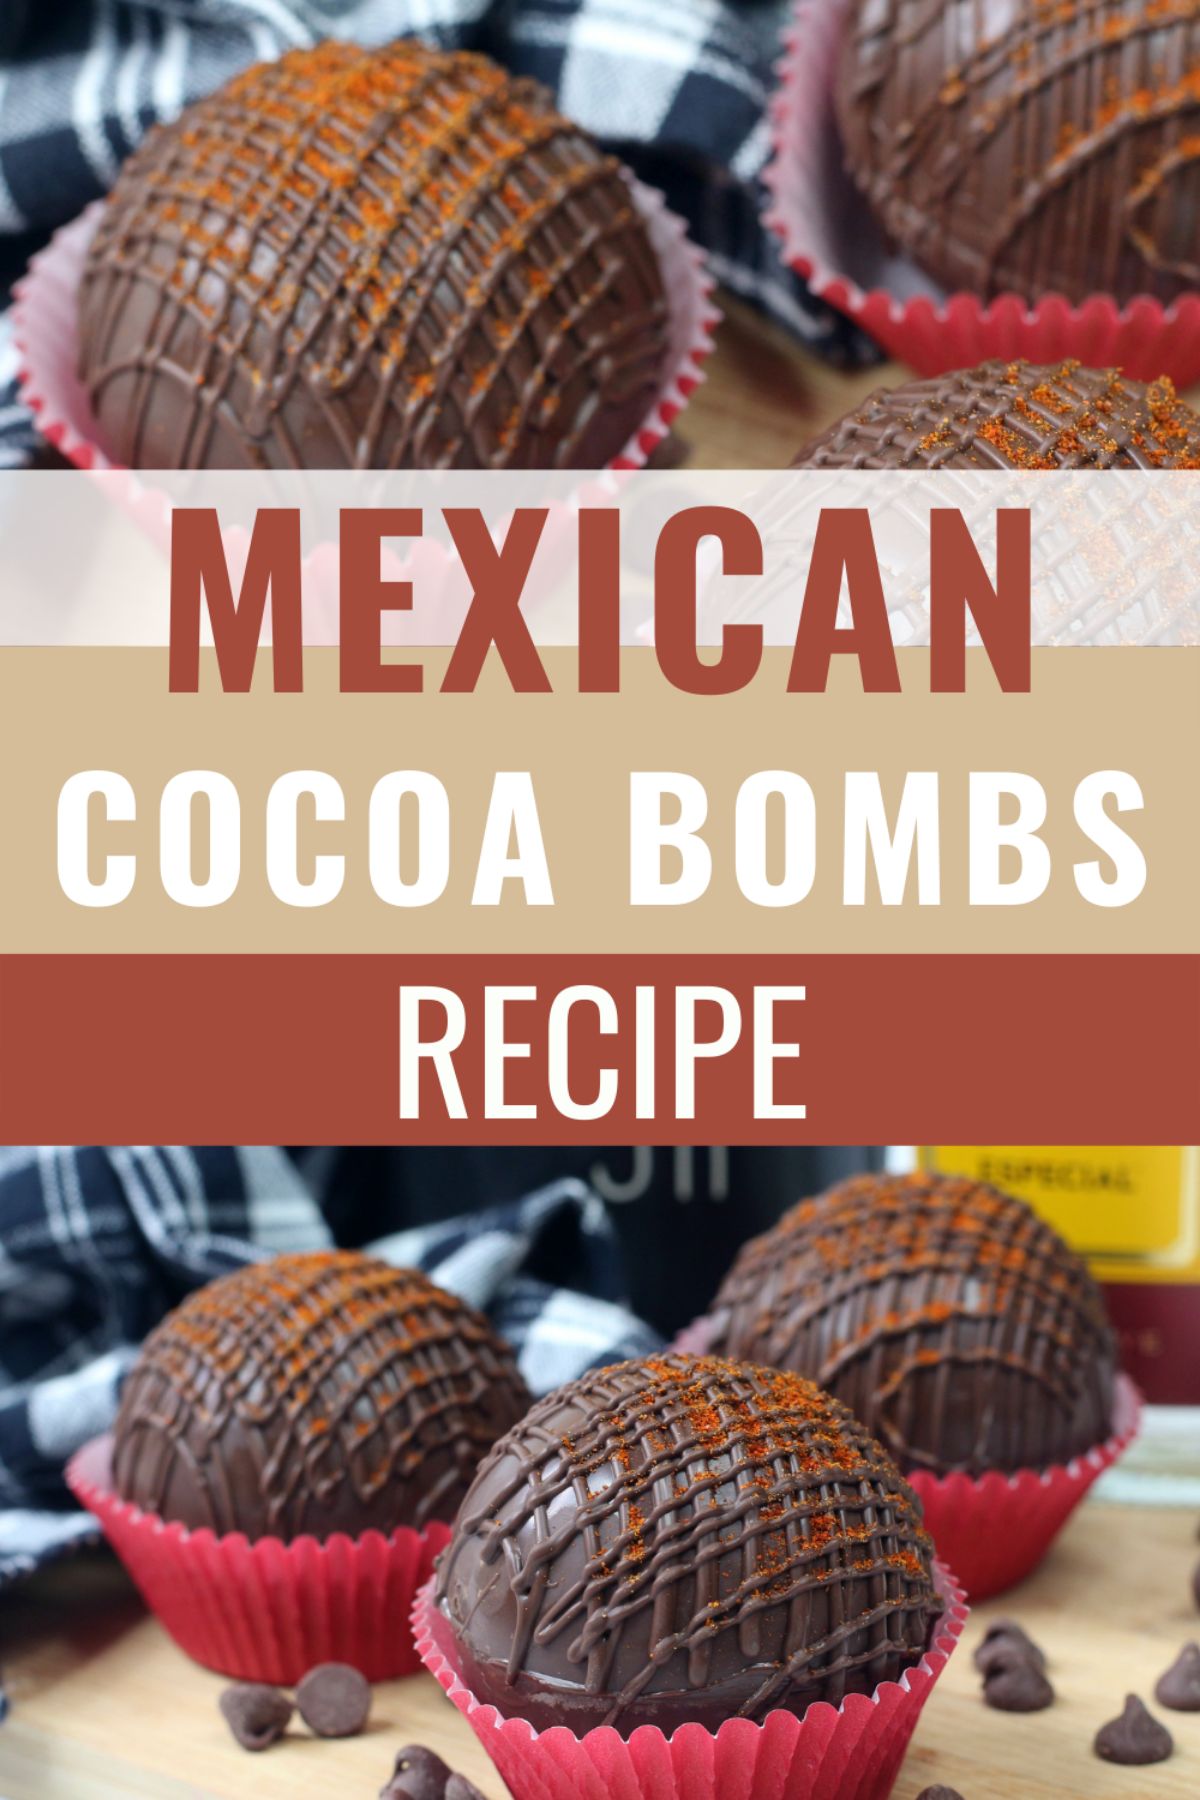 A collage of 2 images of Mexican Hot Cocoa Bombs with a text in between reading "Mexican Cocoa Bombs Recipe"